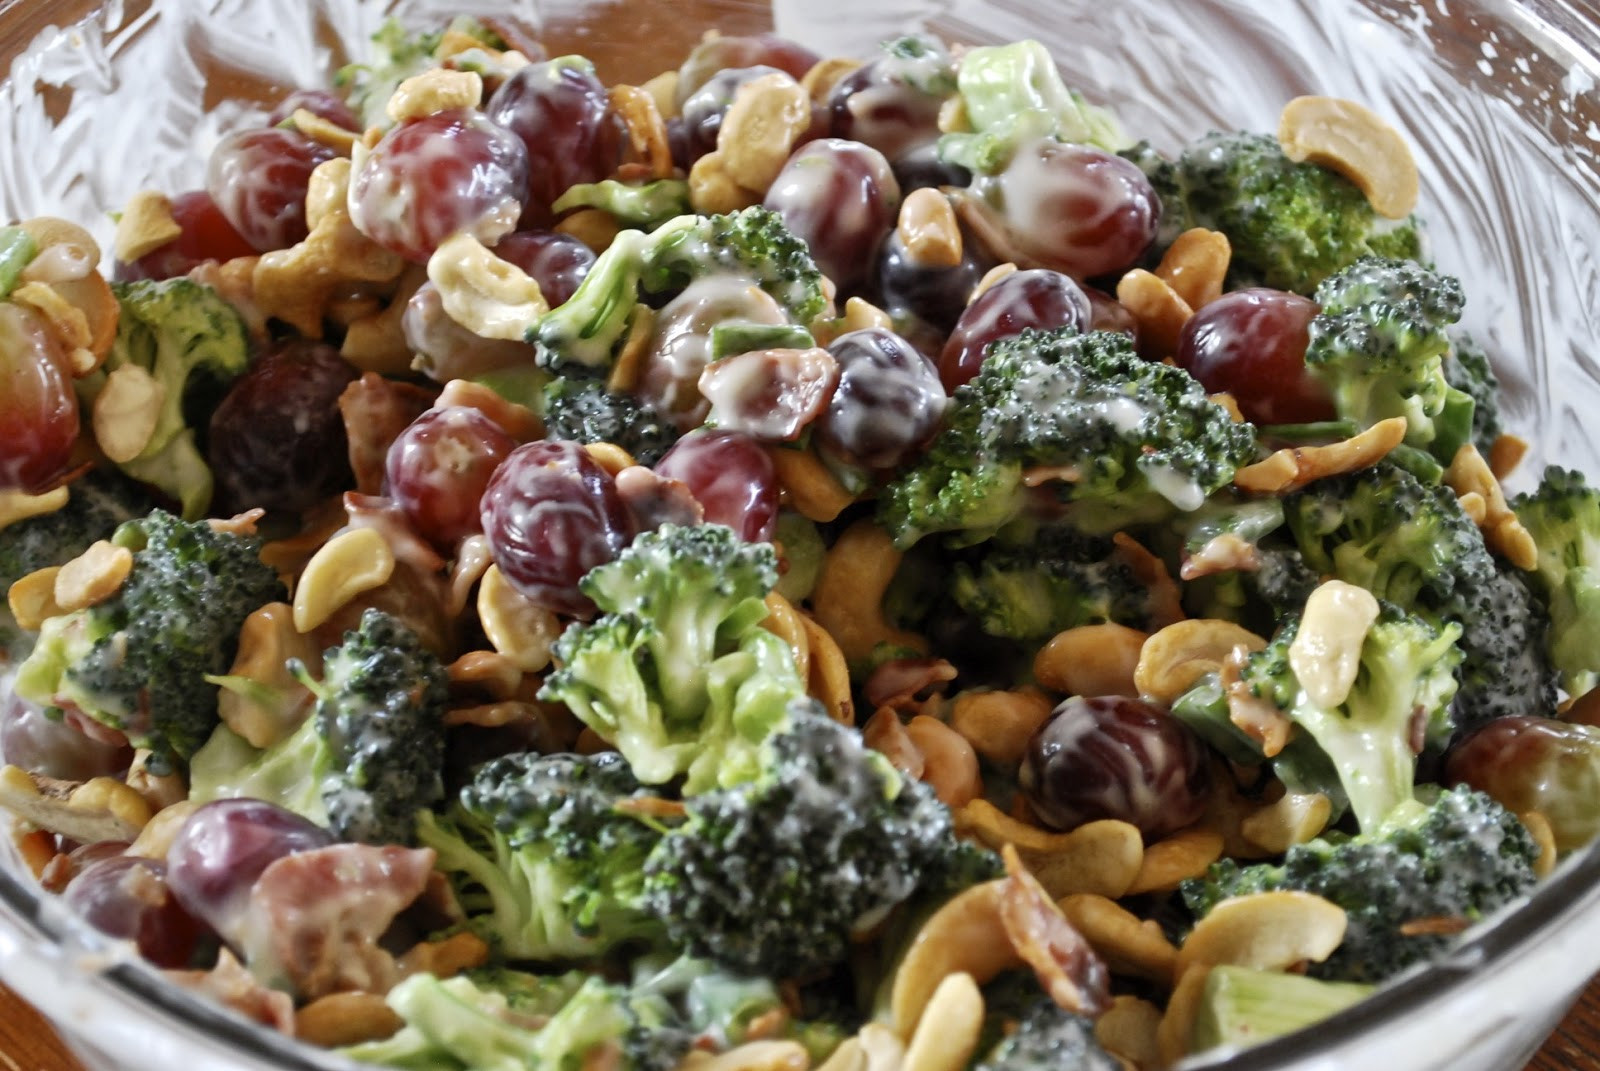 Broccoli Salad With Grapes
 "Point less" Meals Broccoli Grape Salad